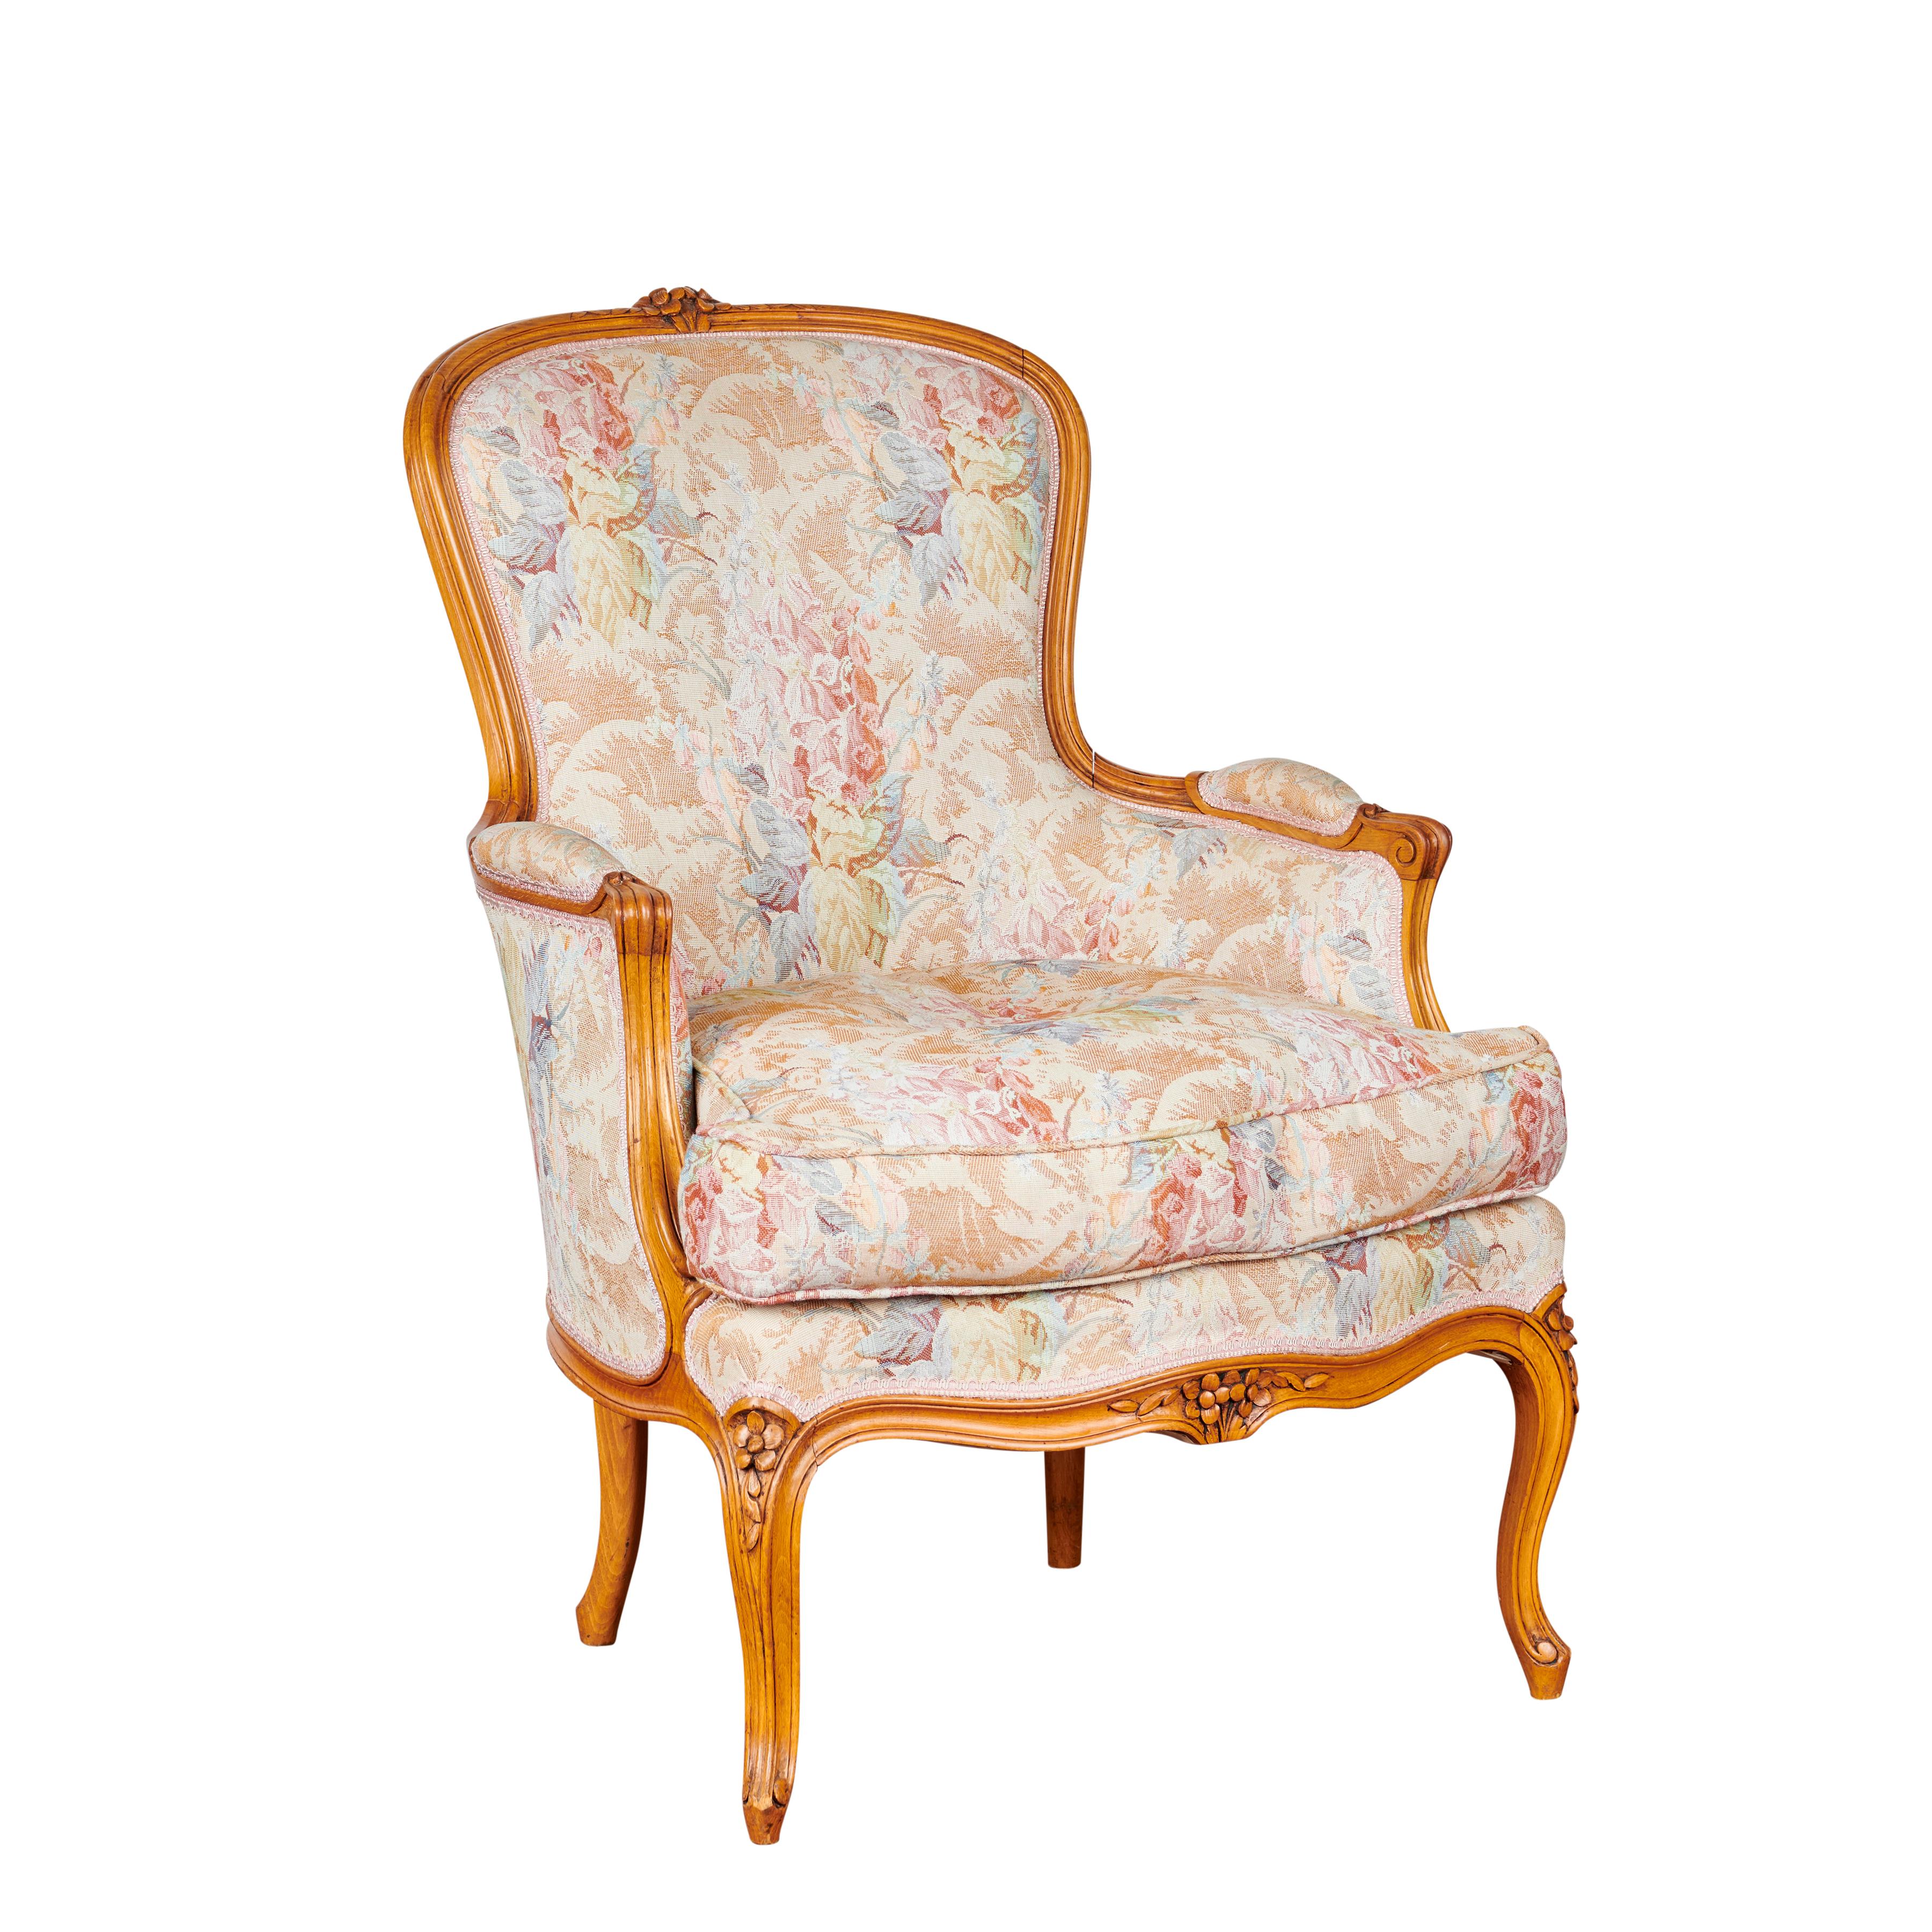 These beautiful circa 1980 French cherrywood armchairs and foot rest (3-piece set), are a comfortable and stylish accompaniment to any fine lounging area. They feature ornate fleur detailing scattered throughout the upholstery, with Louis XV style